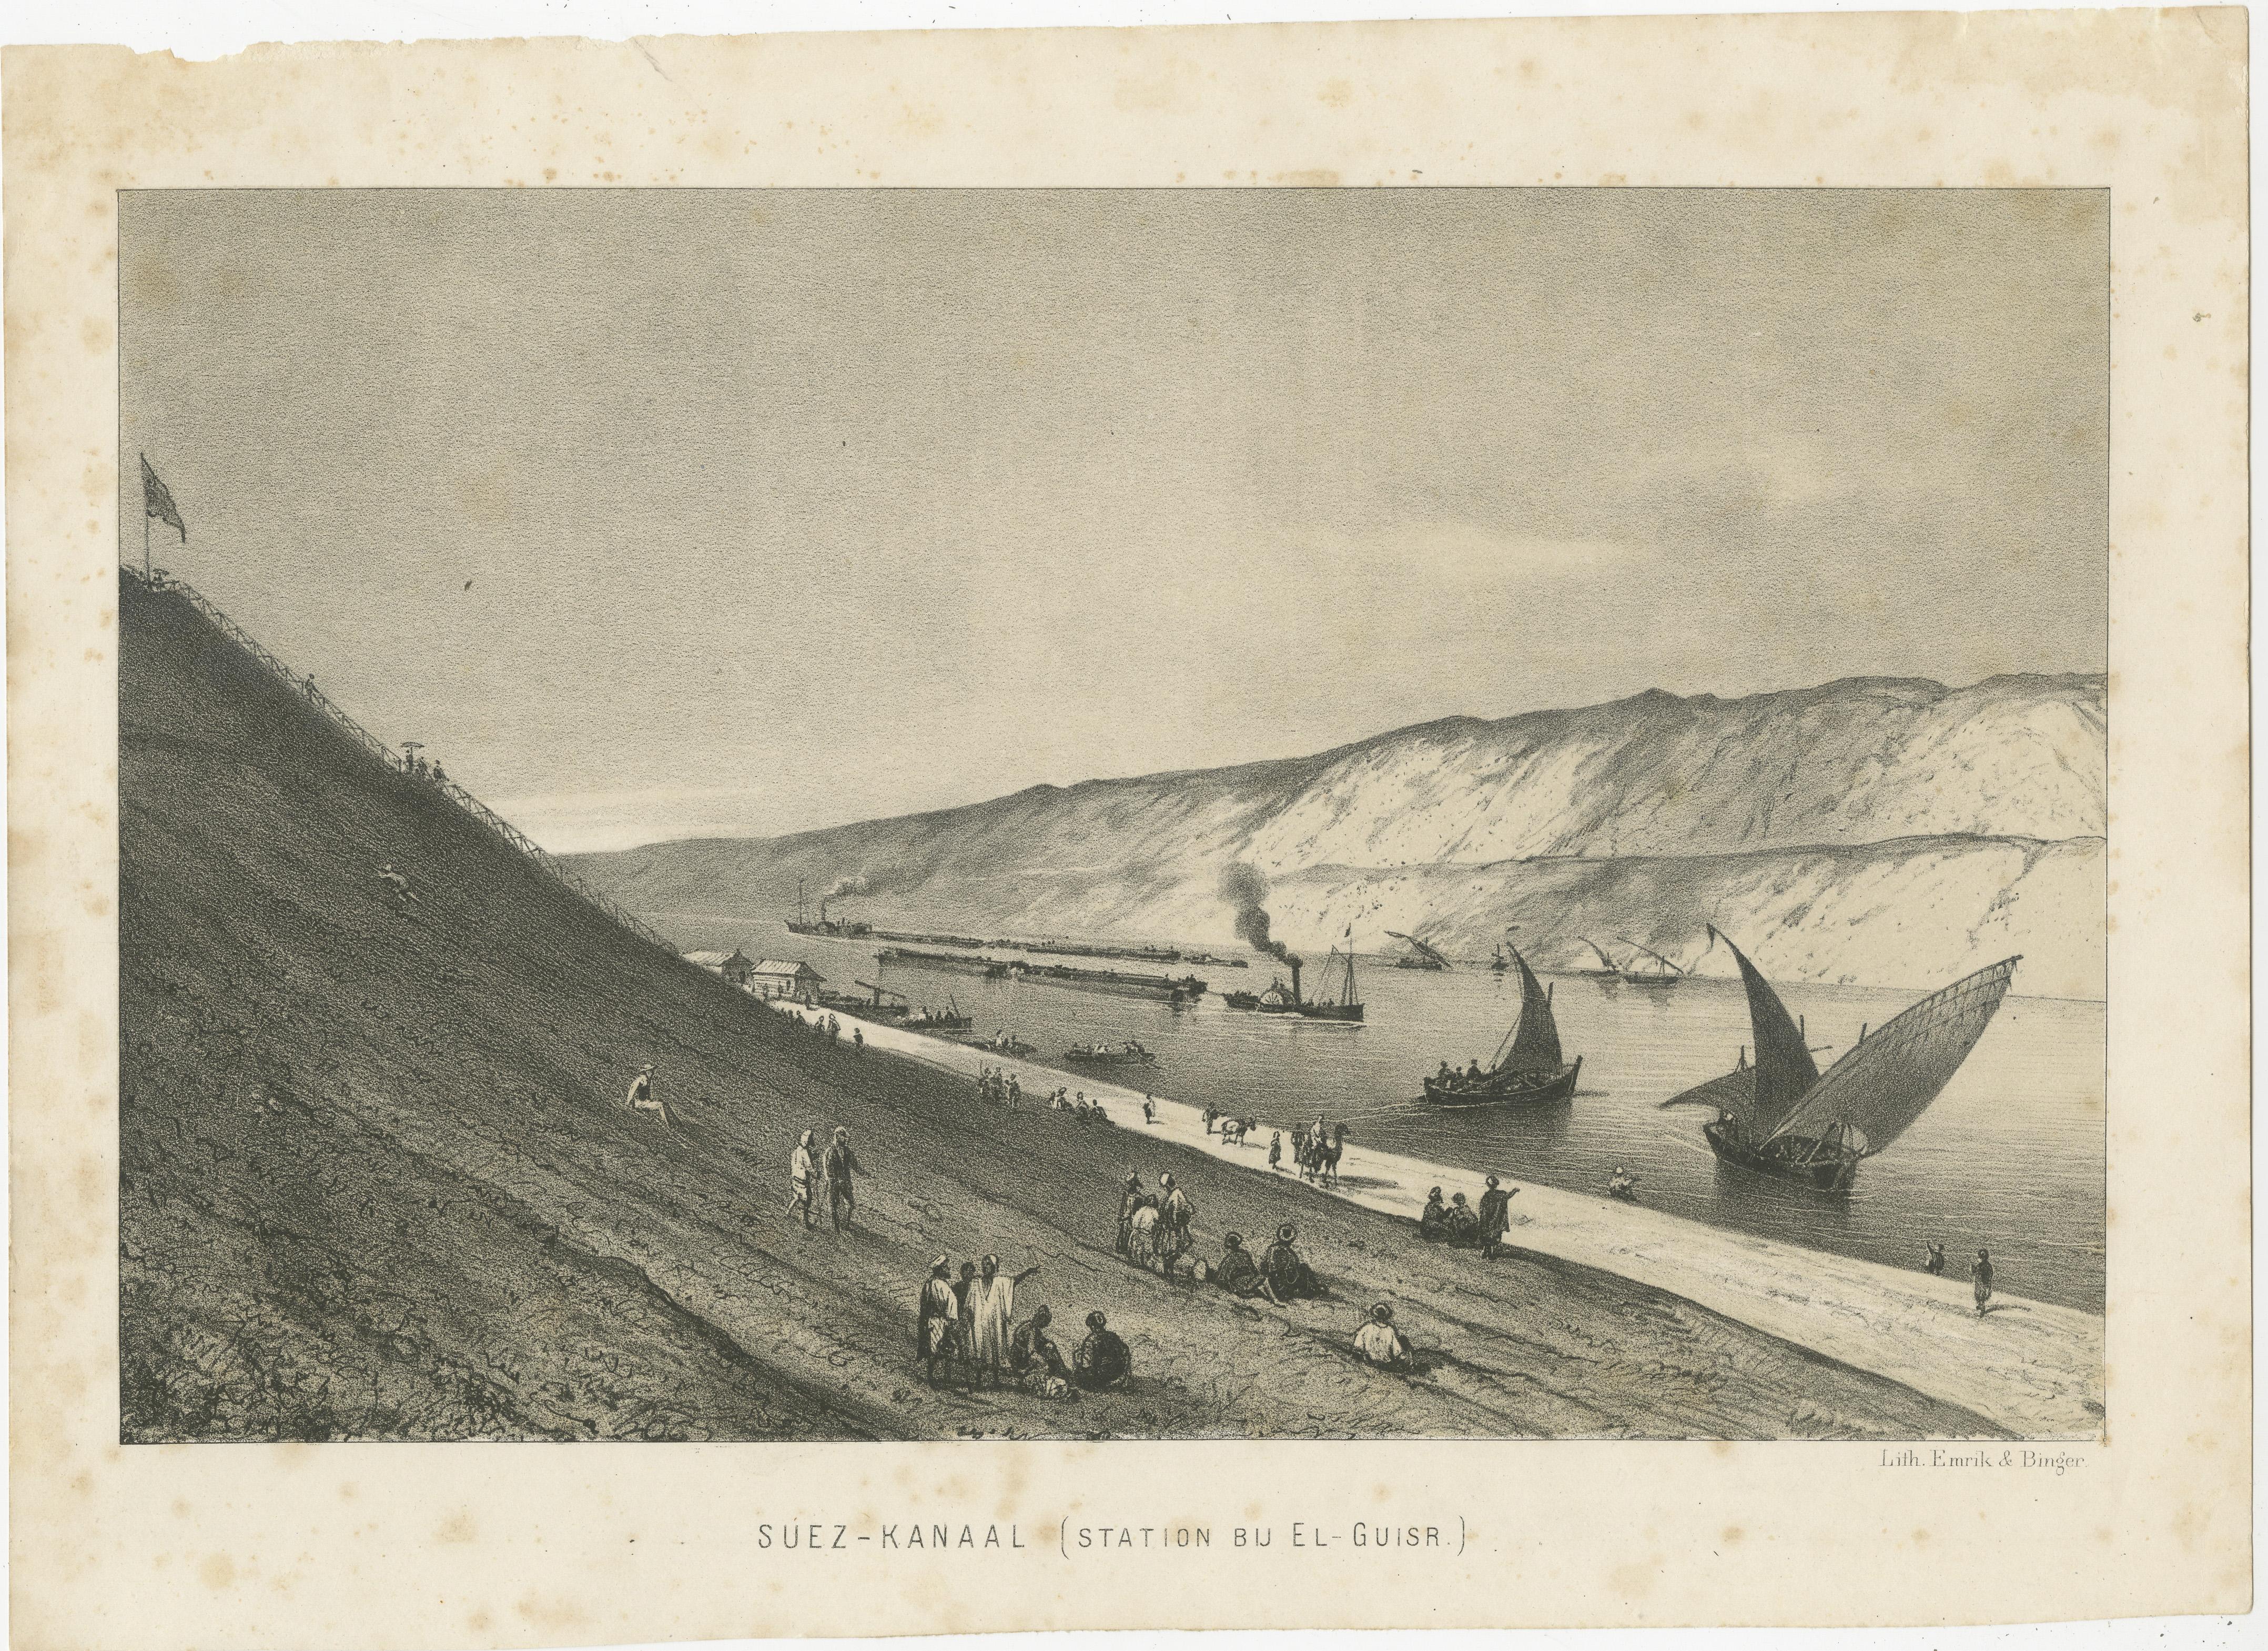 Antique print titled 'Suez-Kanaal (Station bij El-Guisr)'. View of the Suez Canal, an artificial sea-level waterway in Egypt. Lithographed by Emrik & Binger. Published circa 1880. 